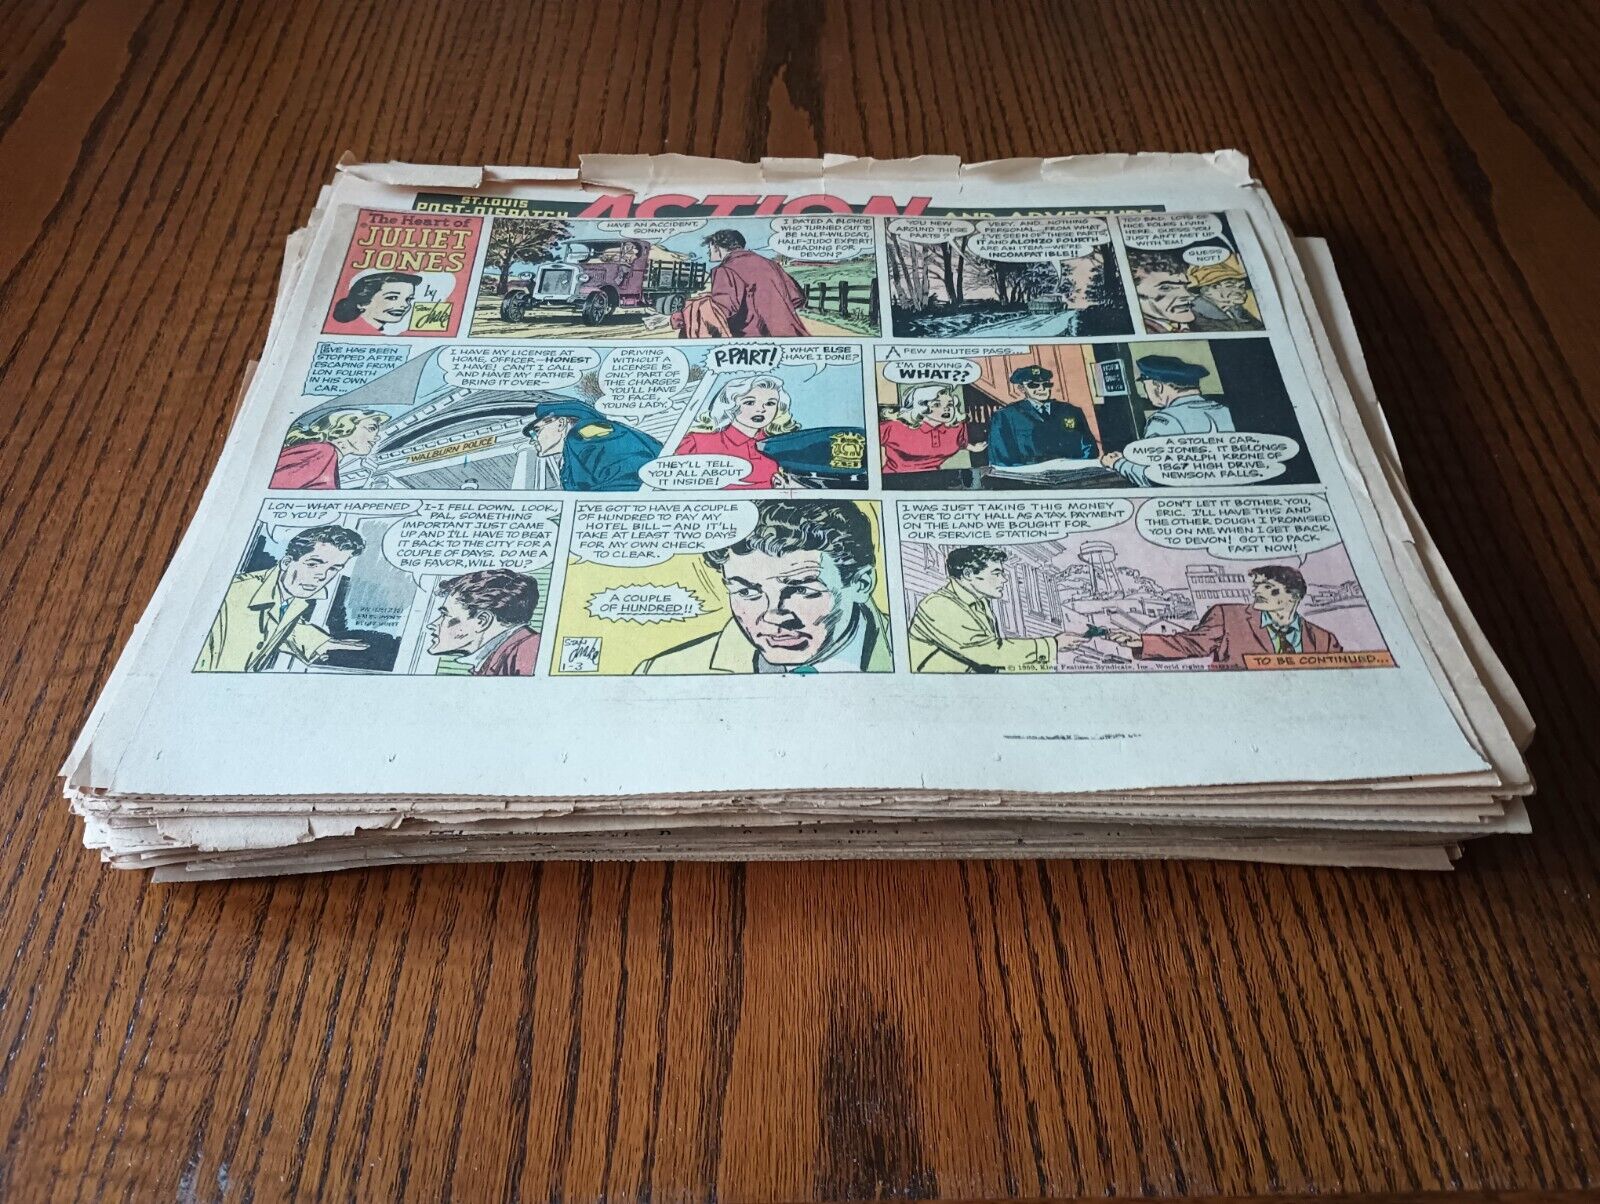 Heart of Juliet Jones by Stan Drake - 209 mostly half pages 1960-63 complete